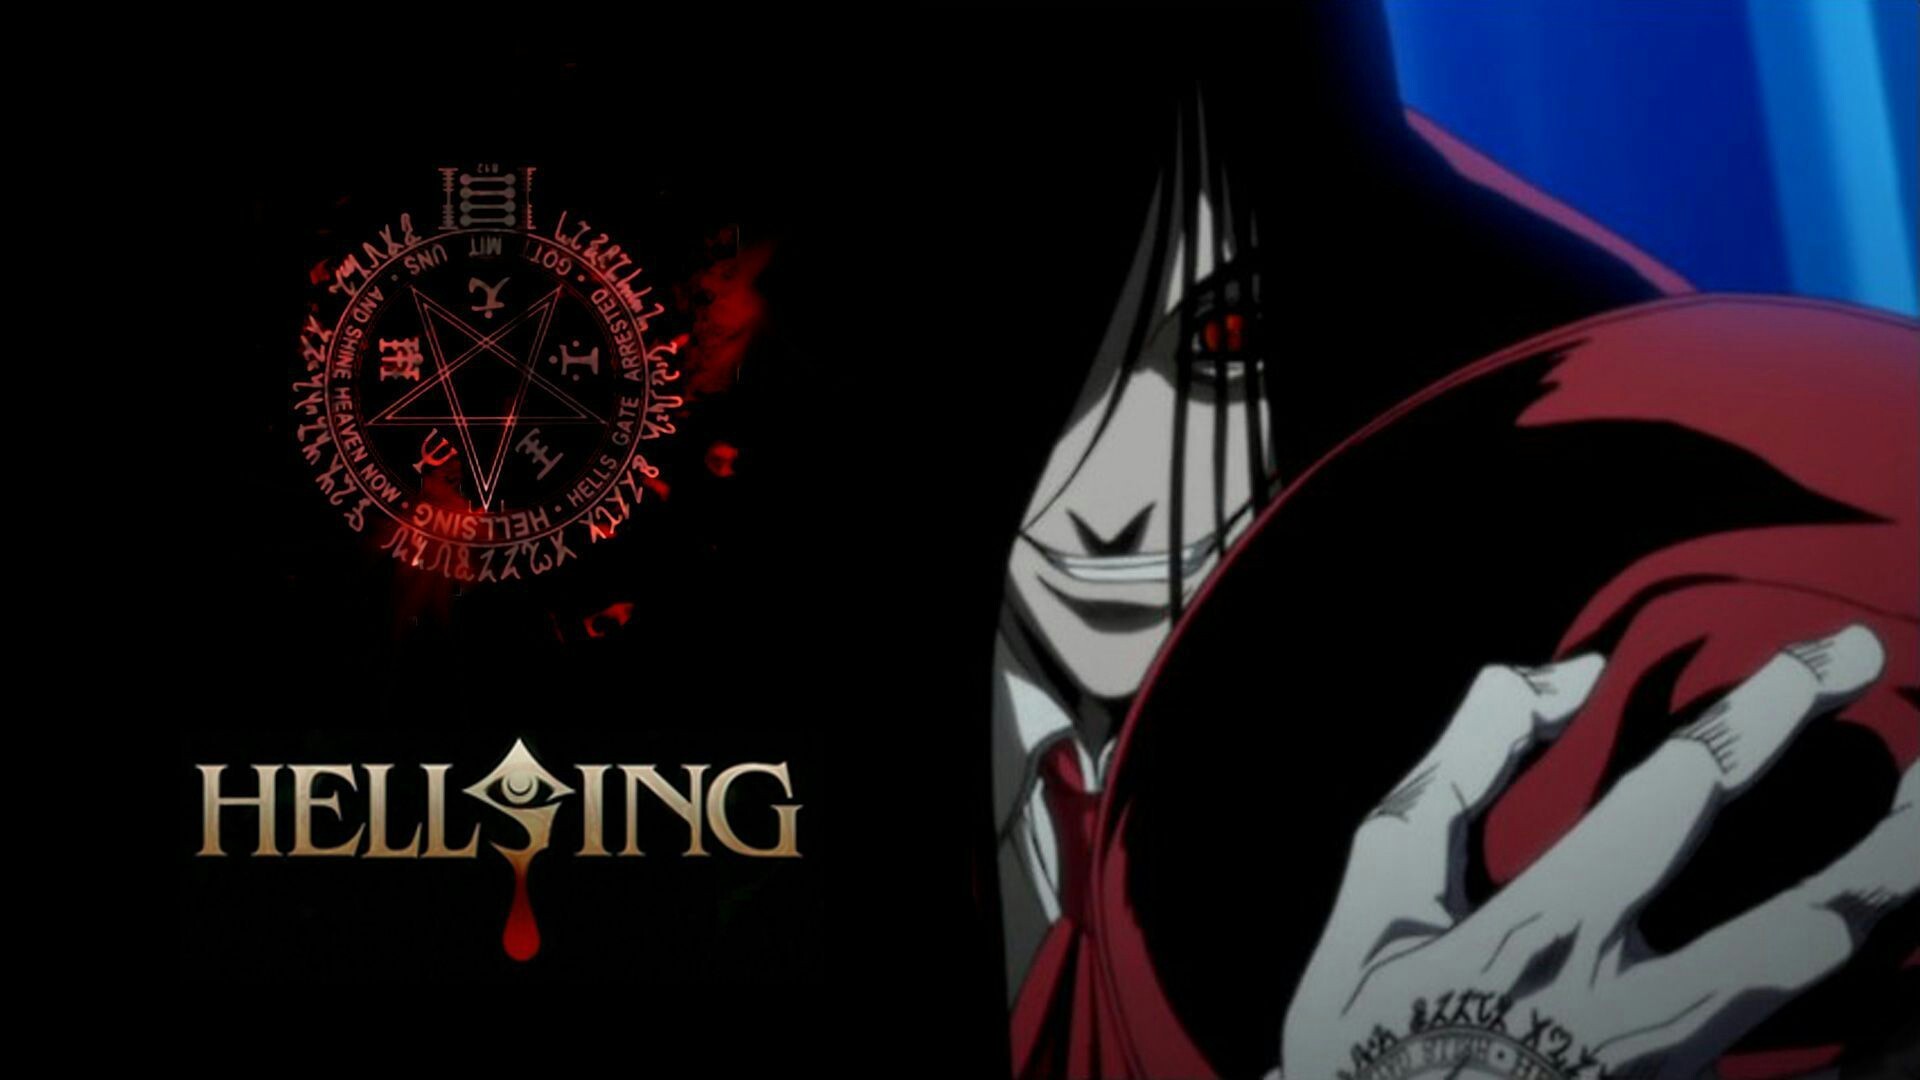 1920x1080 Hellsing Wallpapers with ID 7180 on Anime category in HD Wallpaper Site.  Hellsing Wallpapers is one from many HD Wallpapers on Anime category in HD  ...